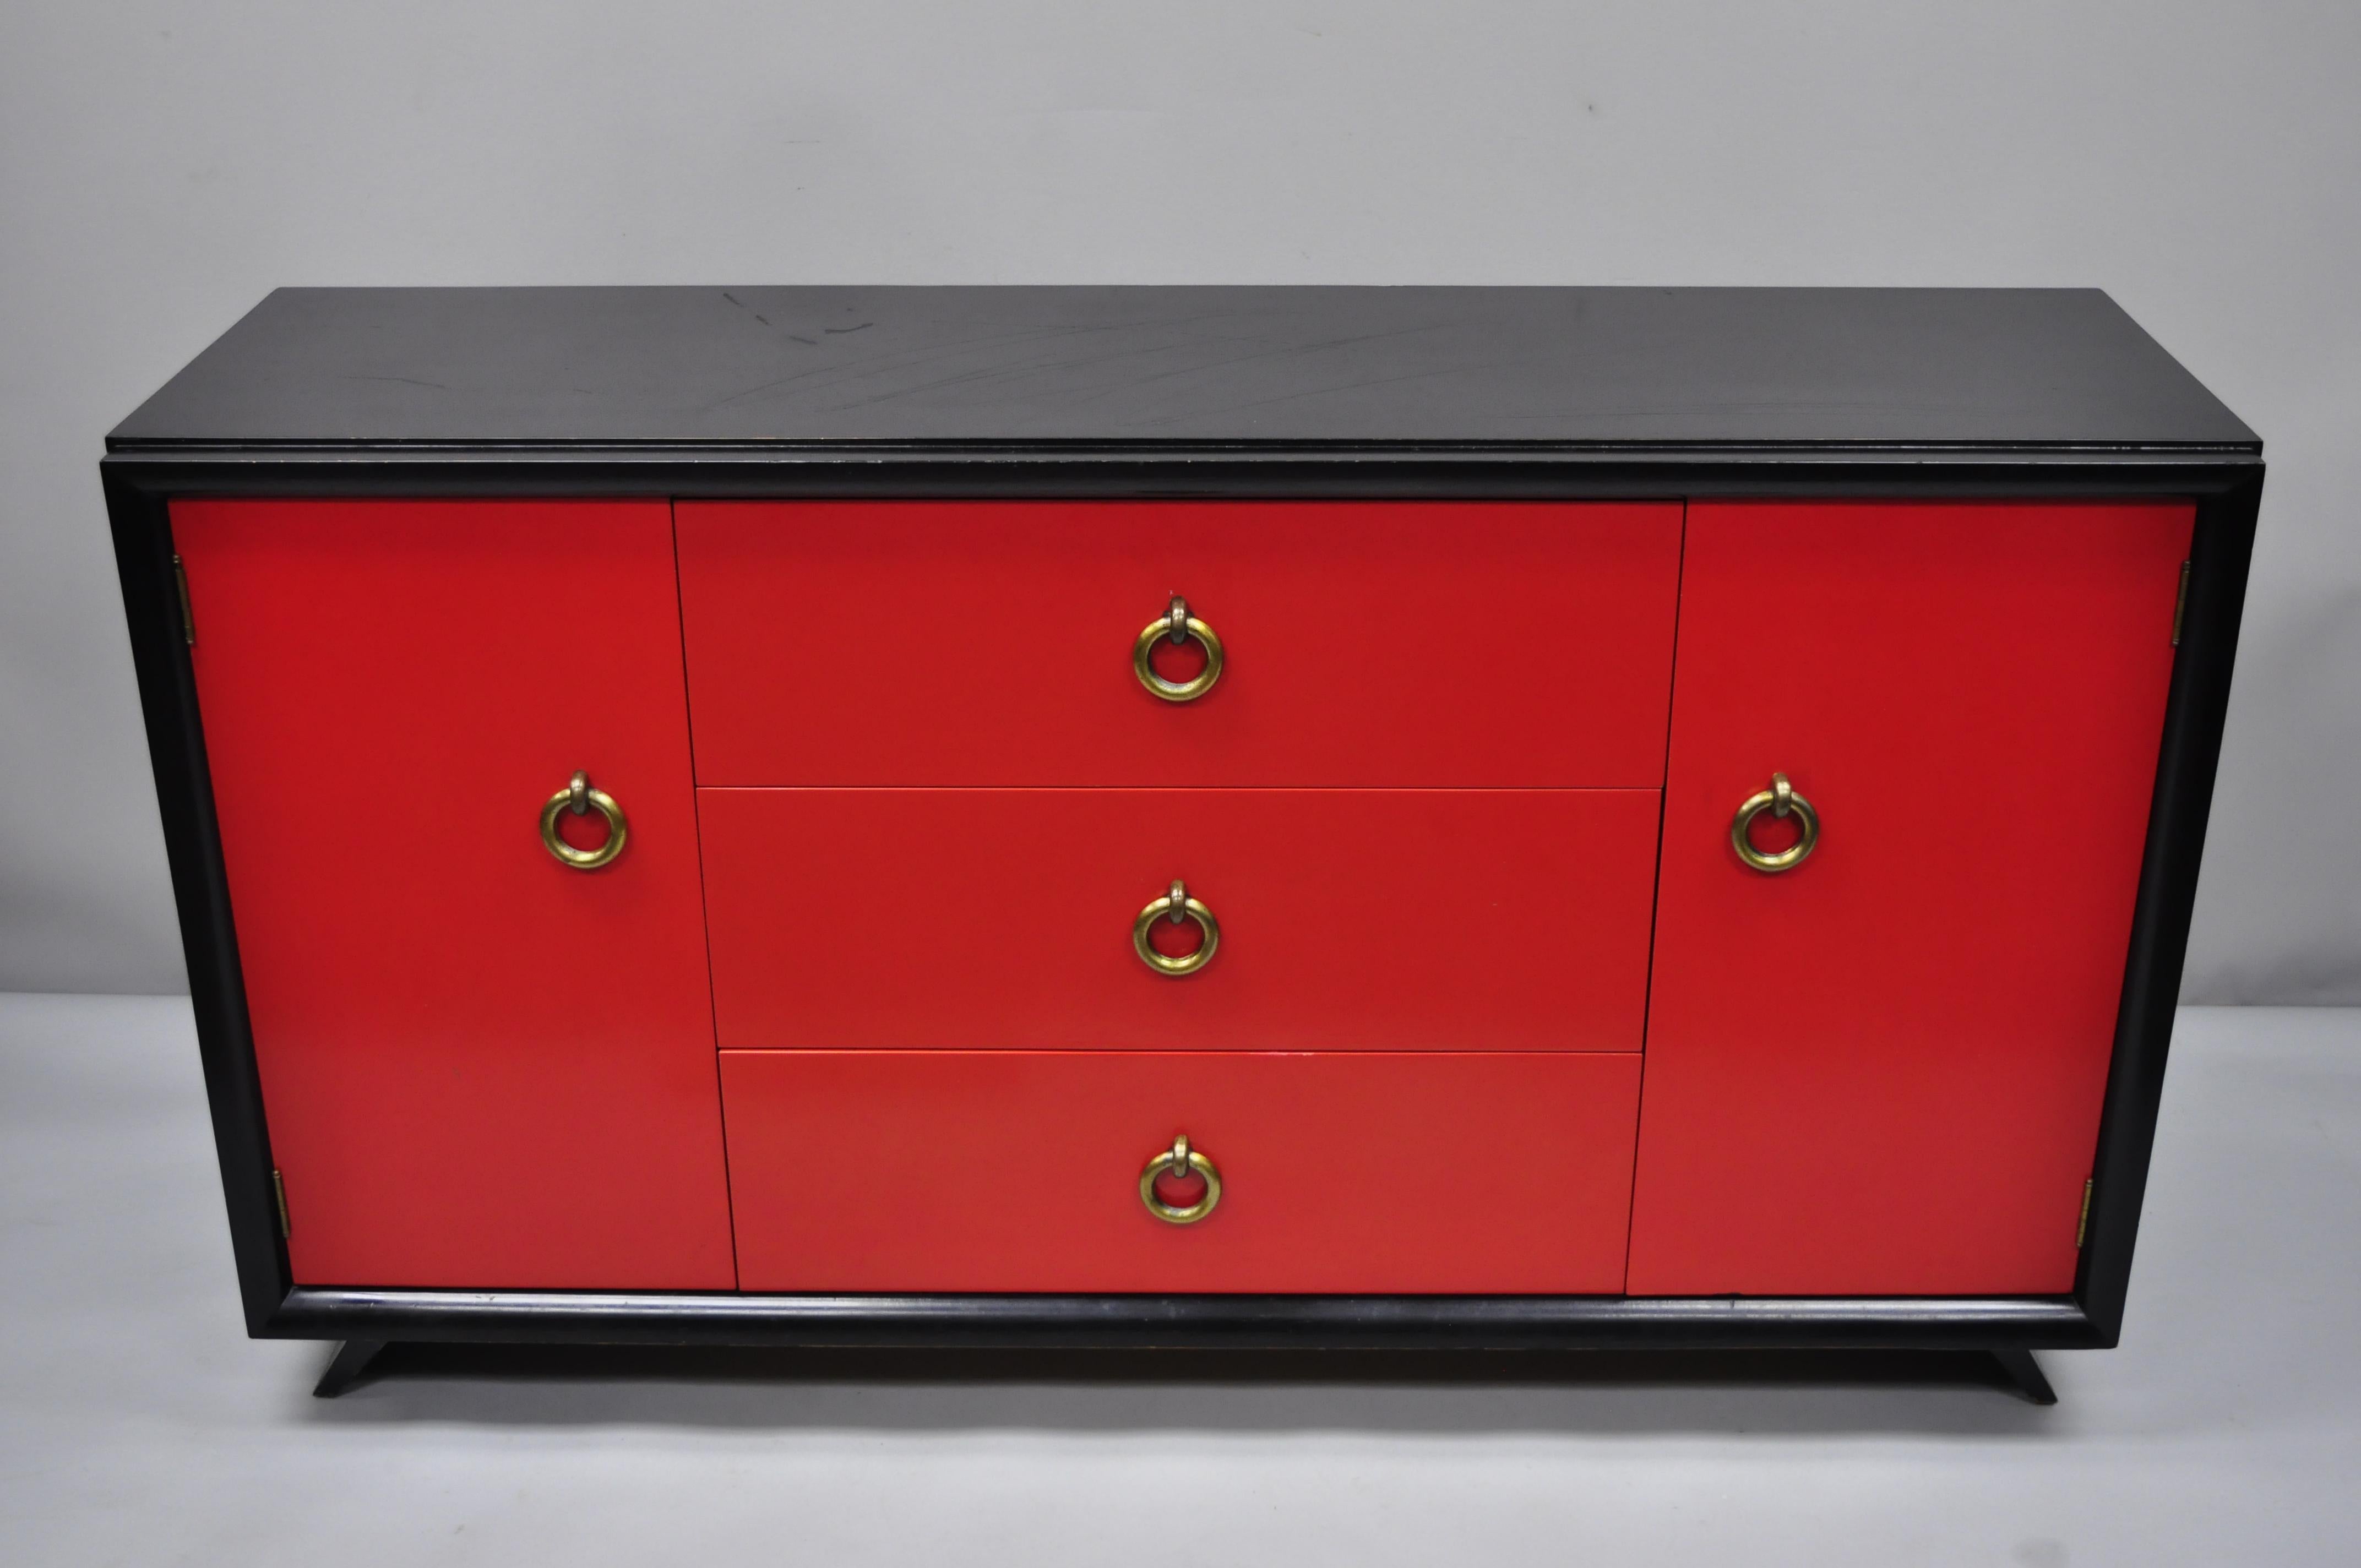 Vintage Mid-Century Modern Art Deco Black and Red Credenza Sideboard by Harjer For Sale 3